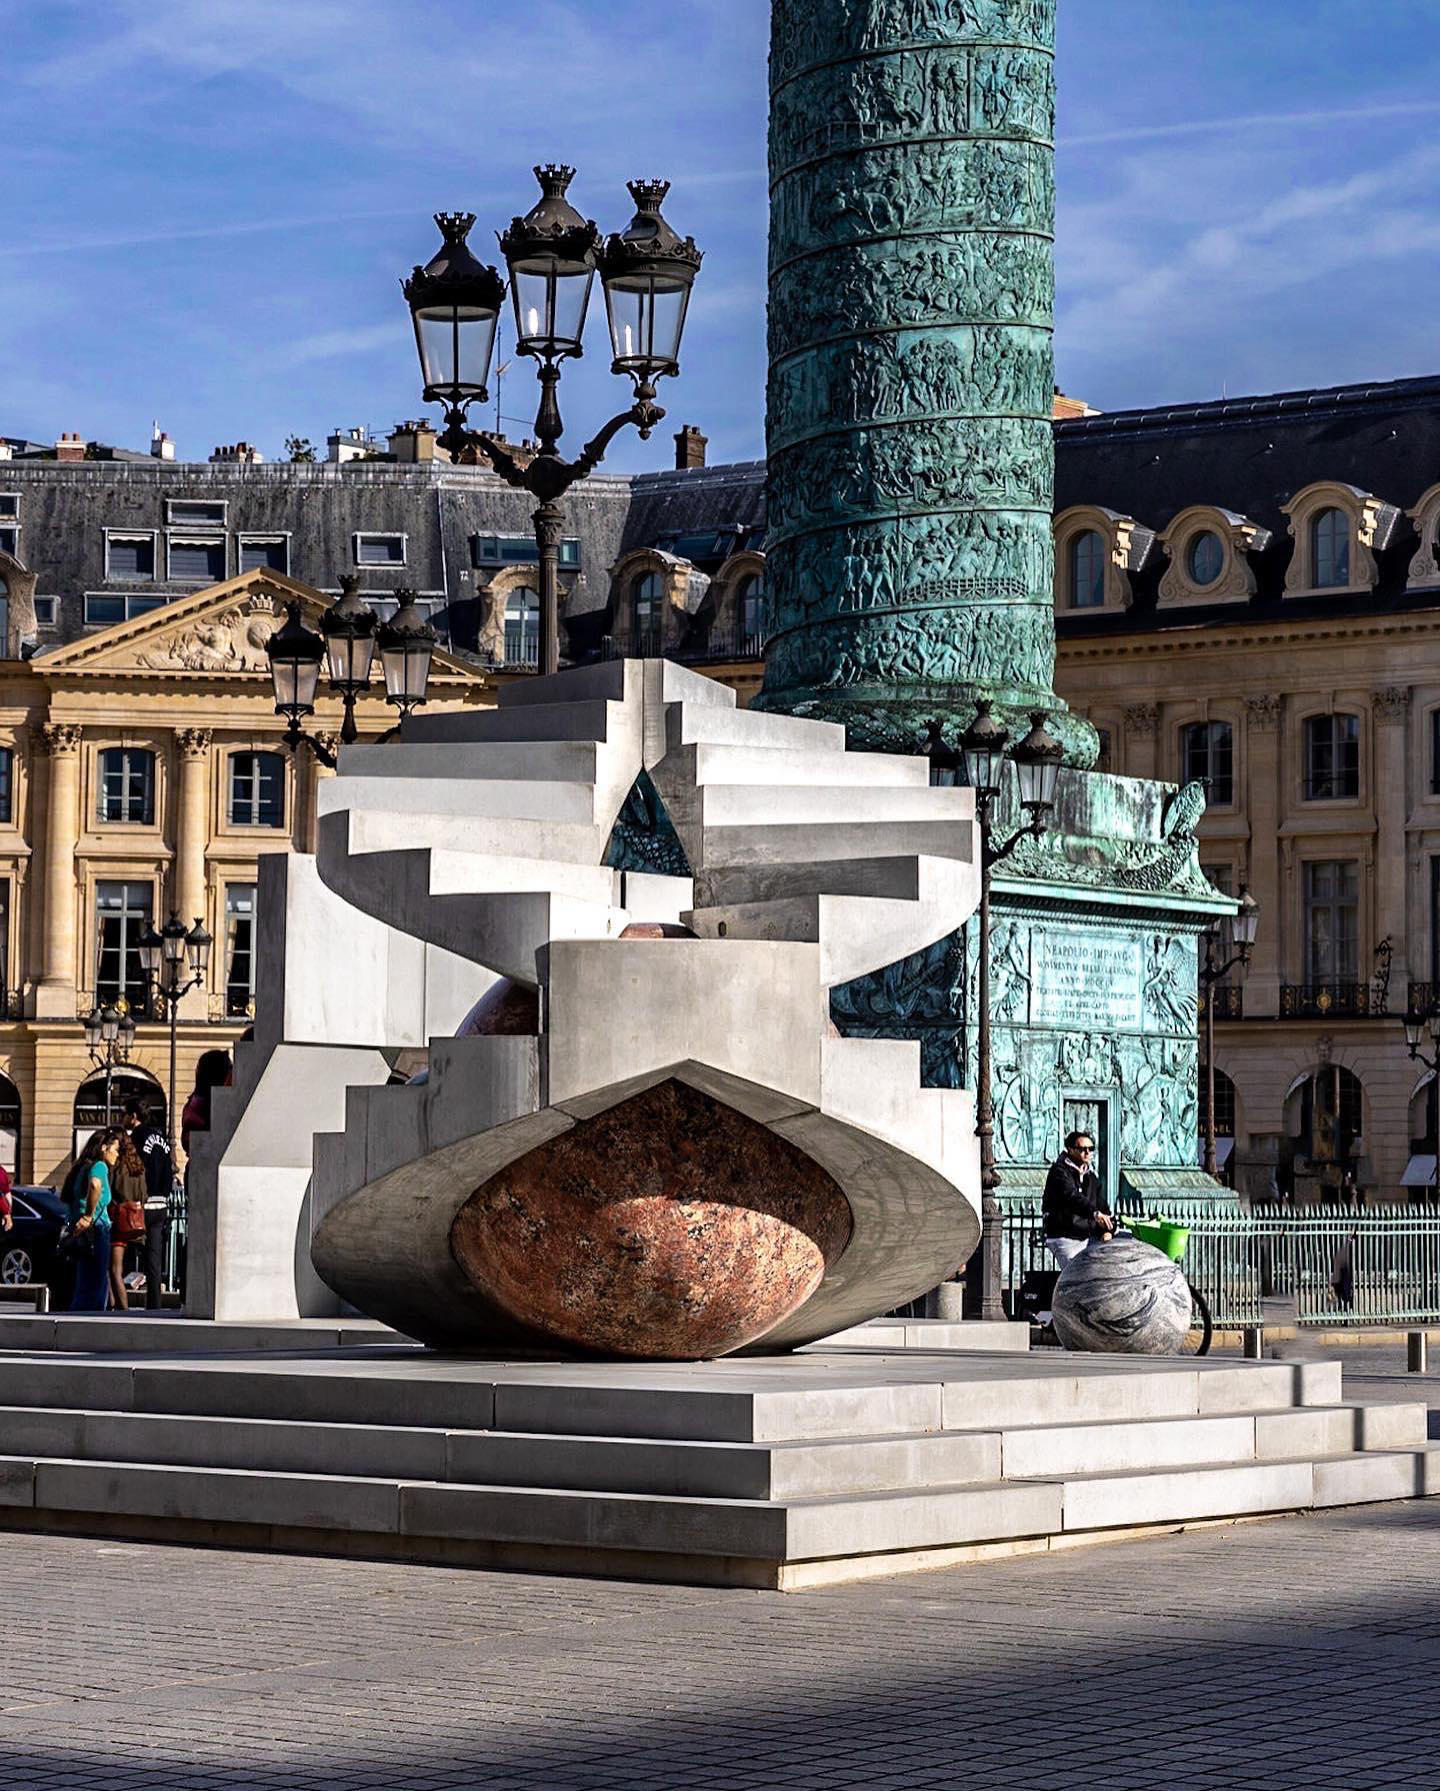 KRETZ FAMILY REAL ESTATE - Paris is the center of the art market once more with the Paris+ Art Basel